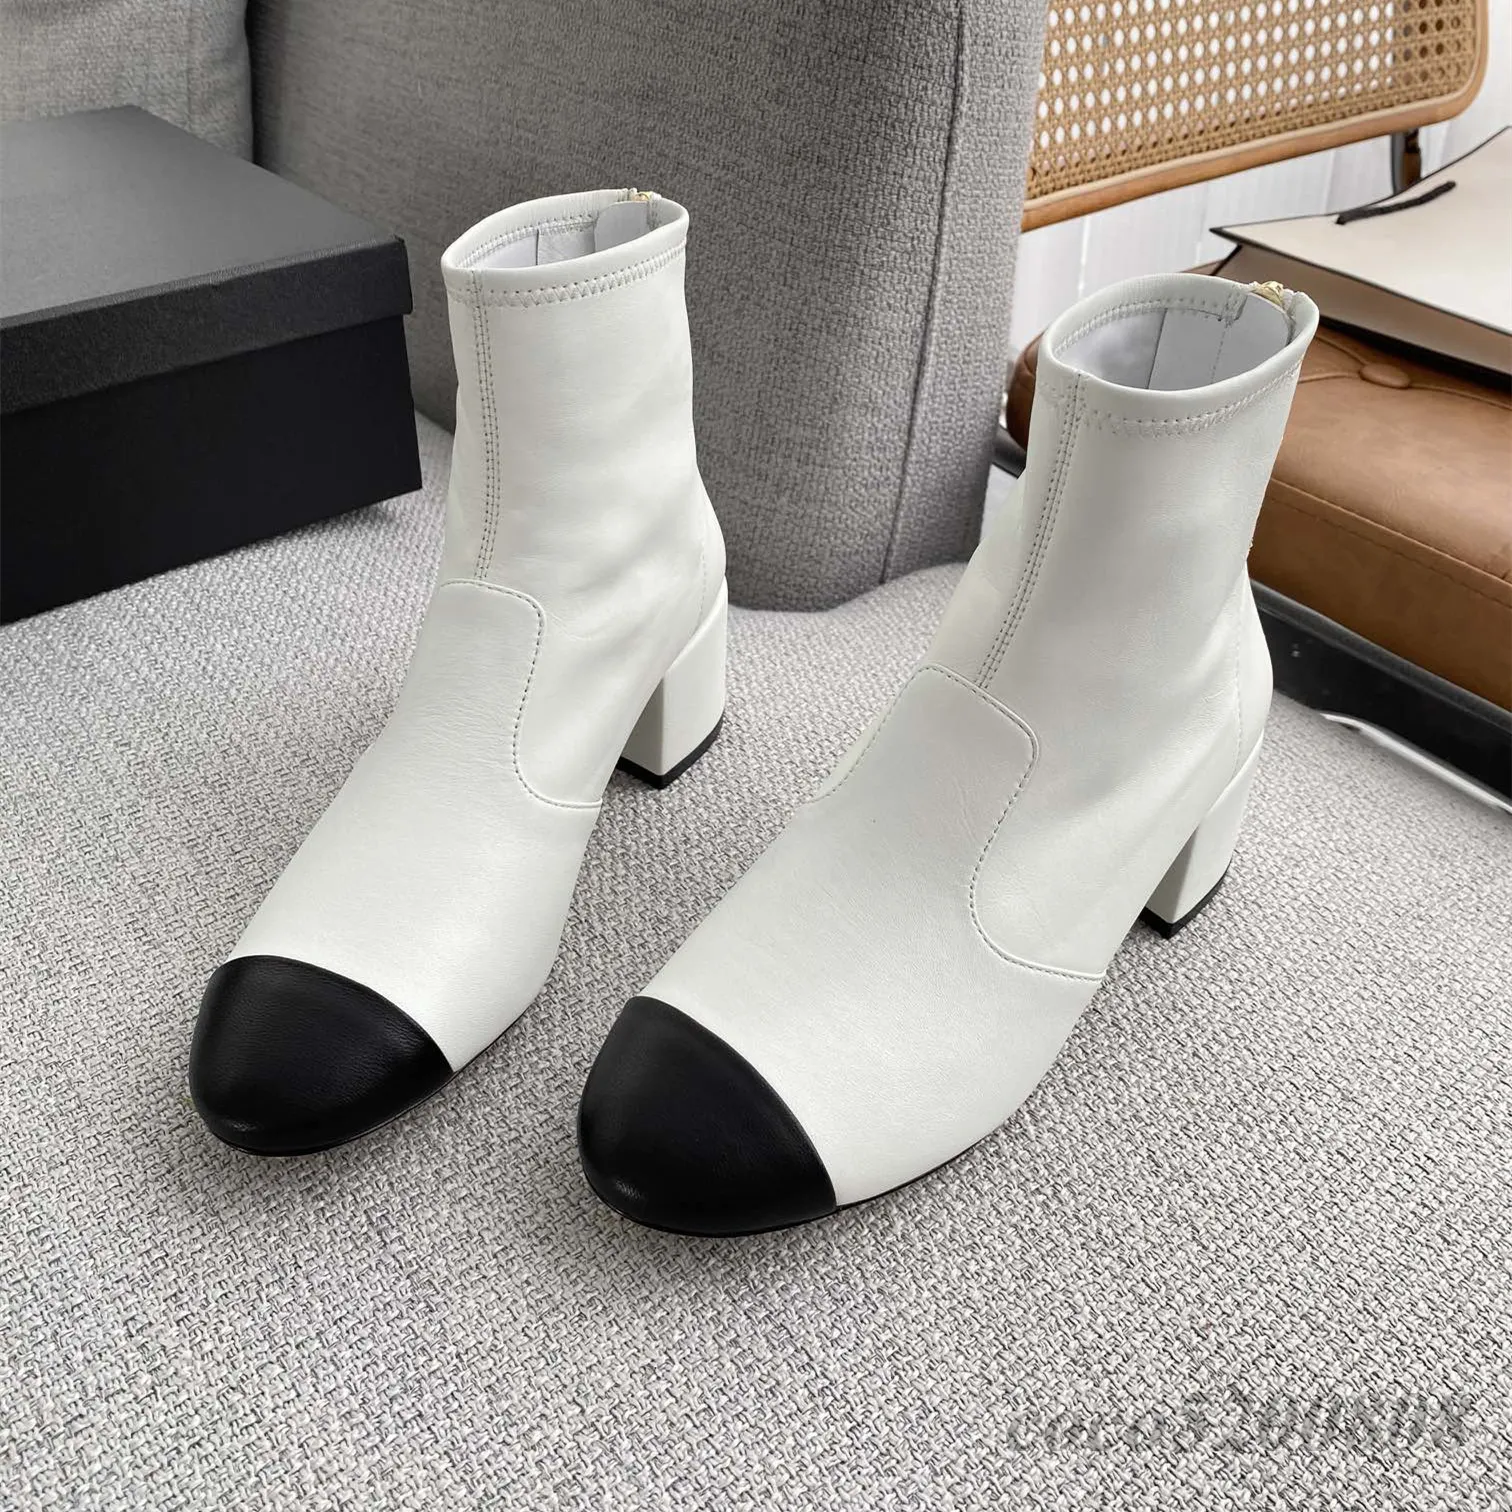 Buy DREAM PAIRS Women's Fashion Ankle Boots - Chunky High Heel Booties at  Amazon.in